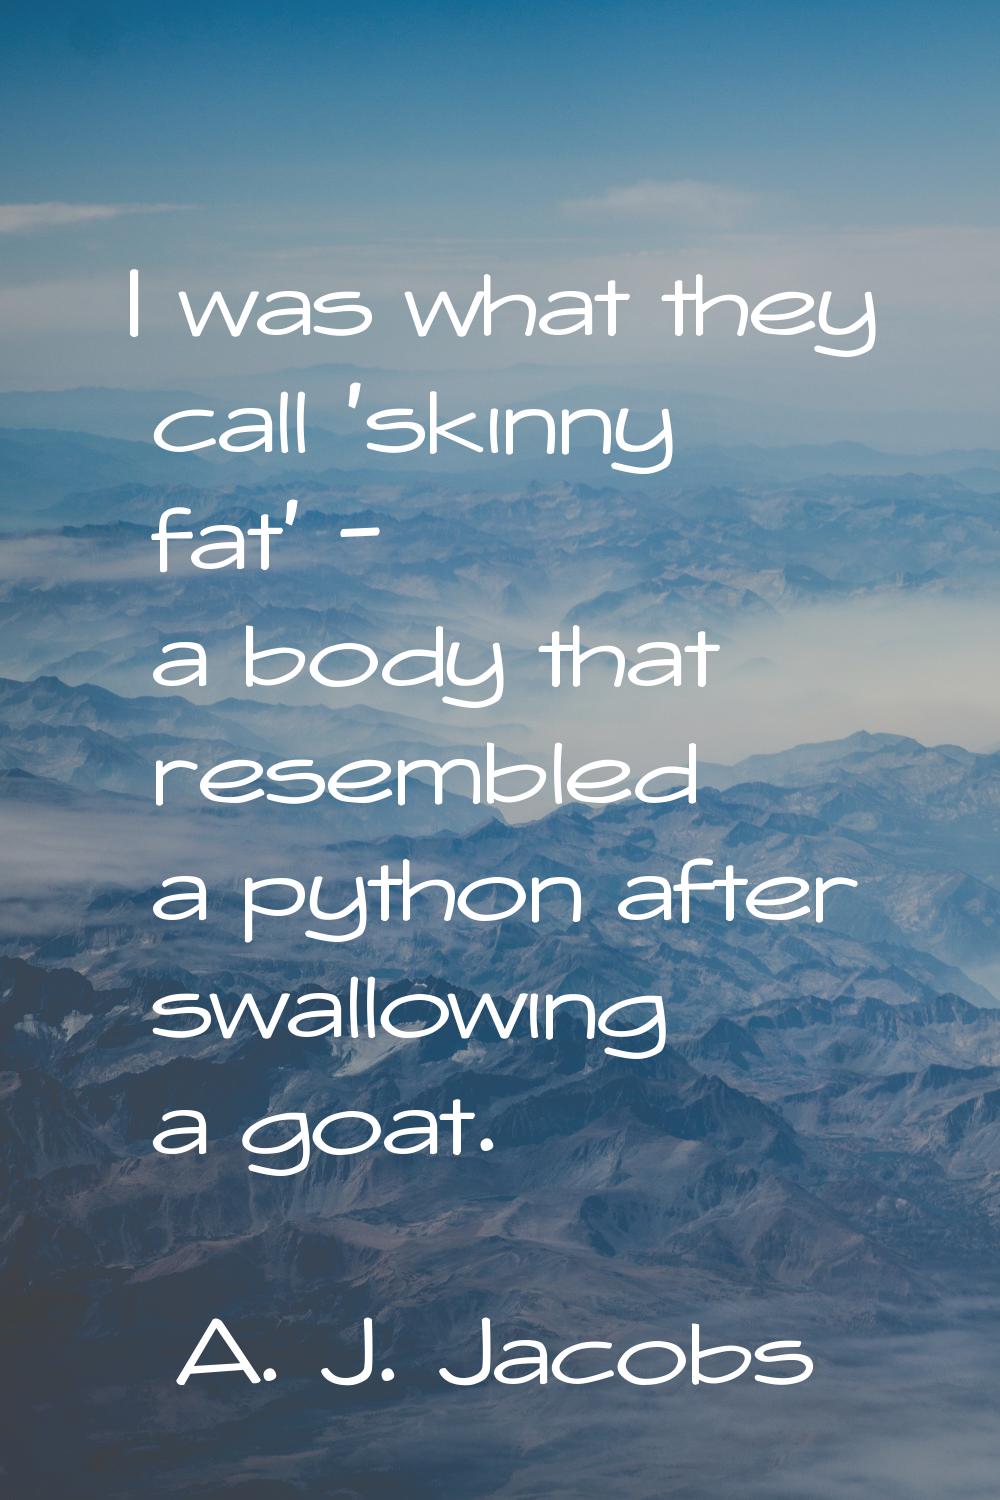 I was what they call 'skinny fat' - a body that resembled a python after swallowing a goat.